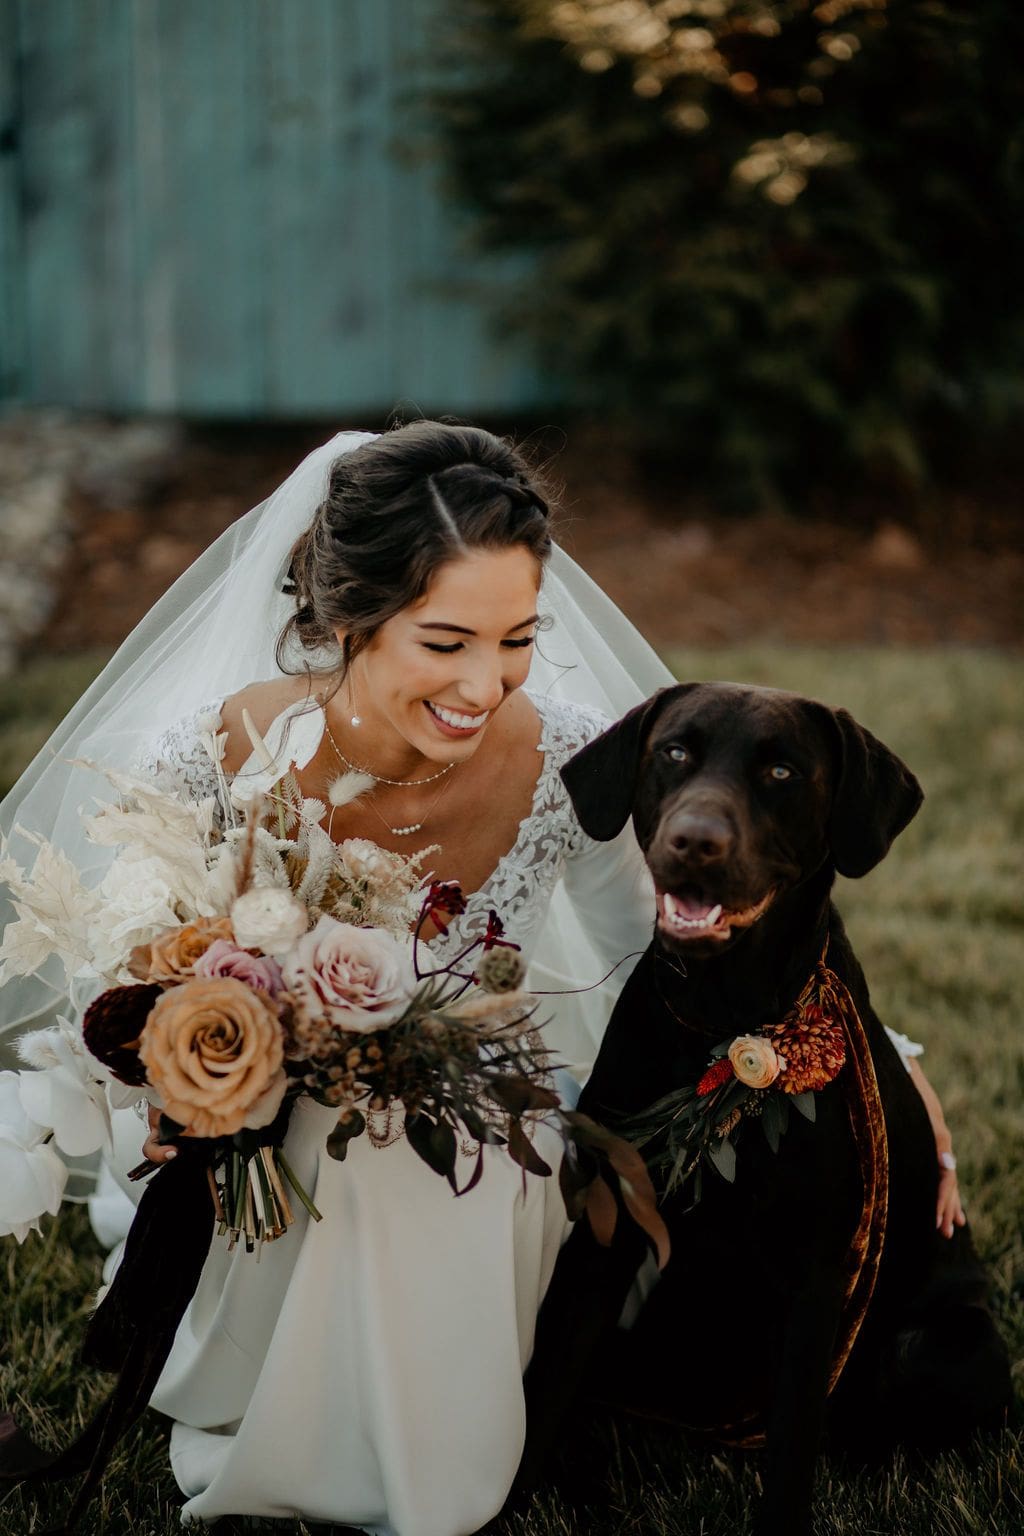 pup dressed up for wedding ceremony with bride